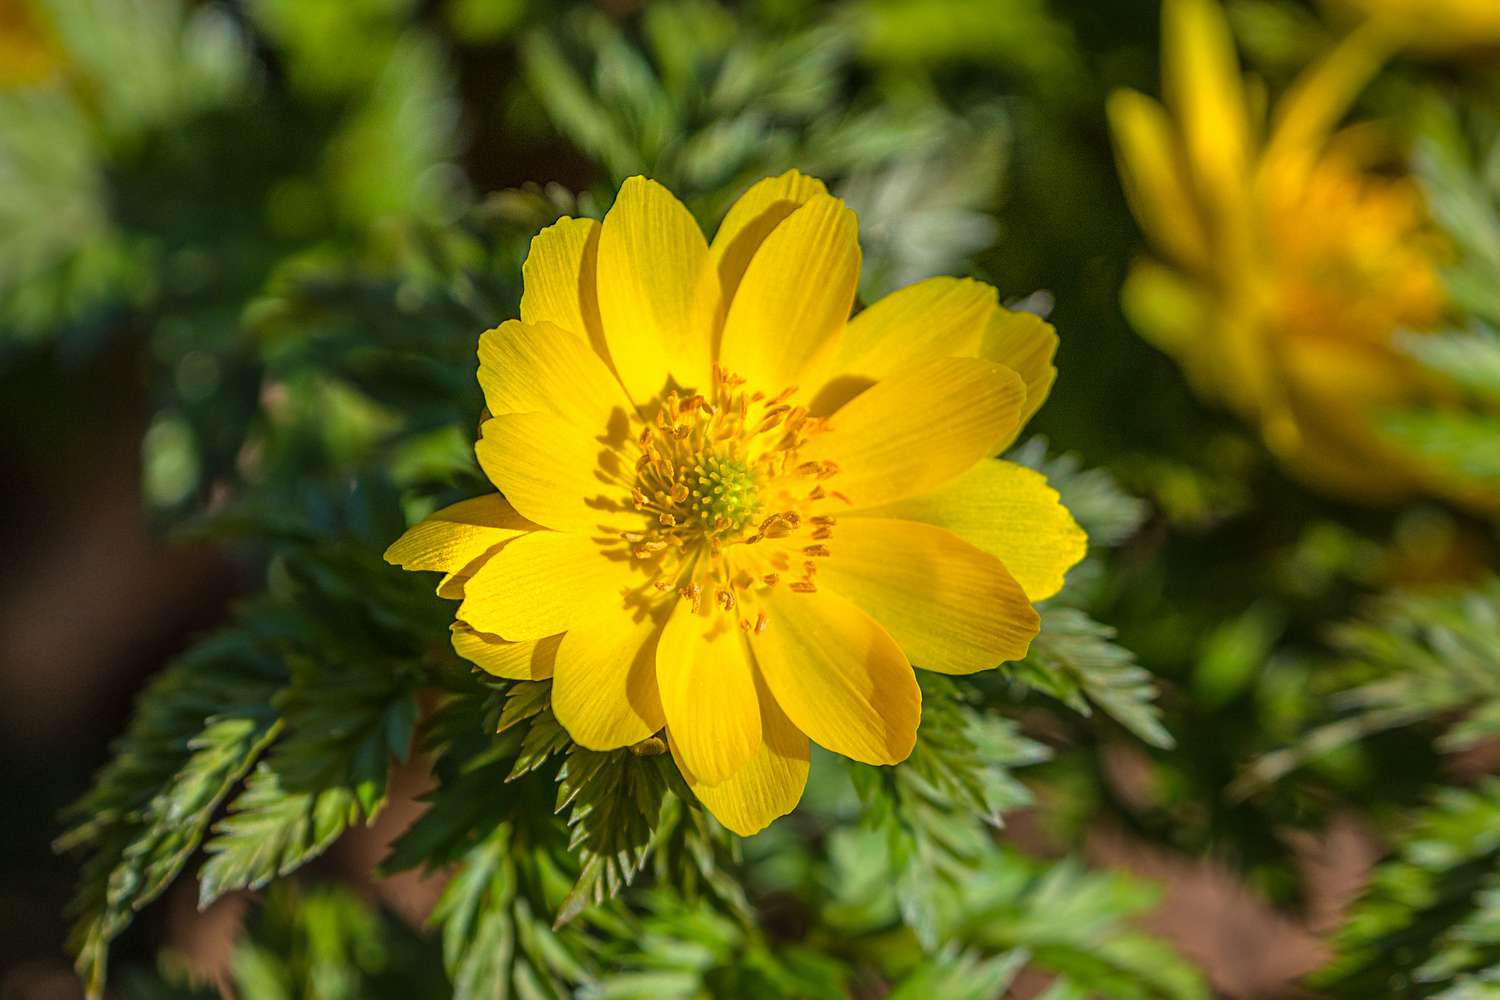 Amur Adonis flowers that start with a